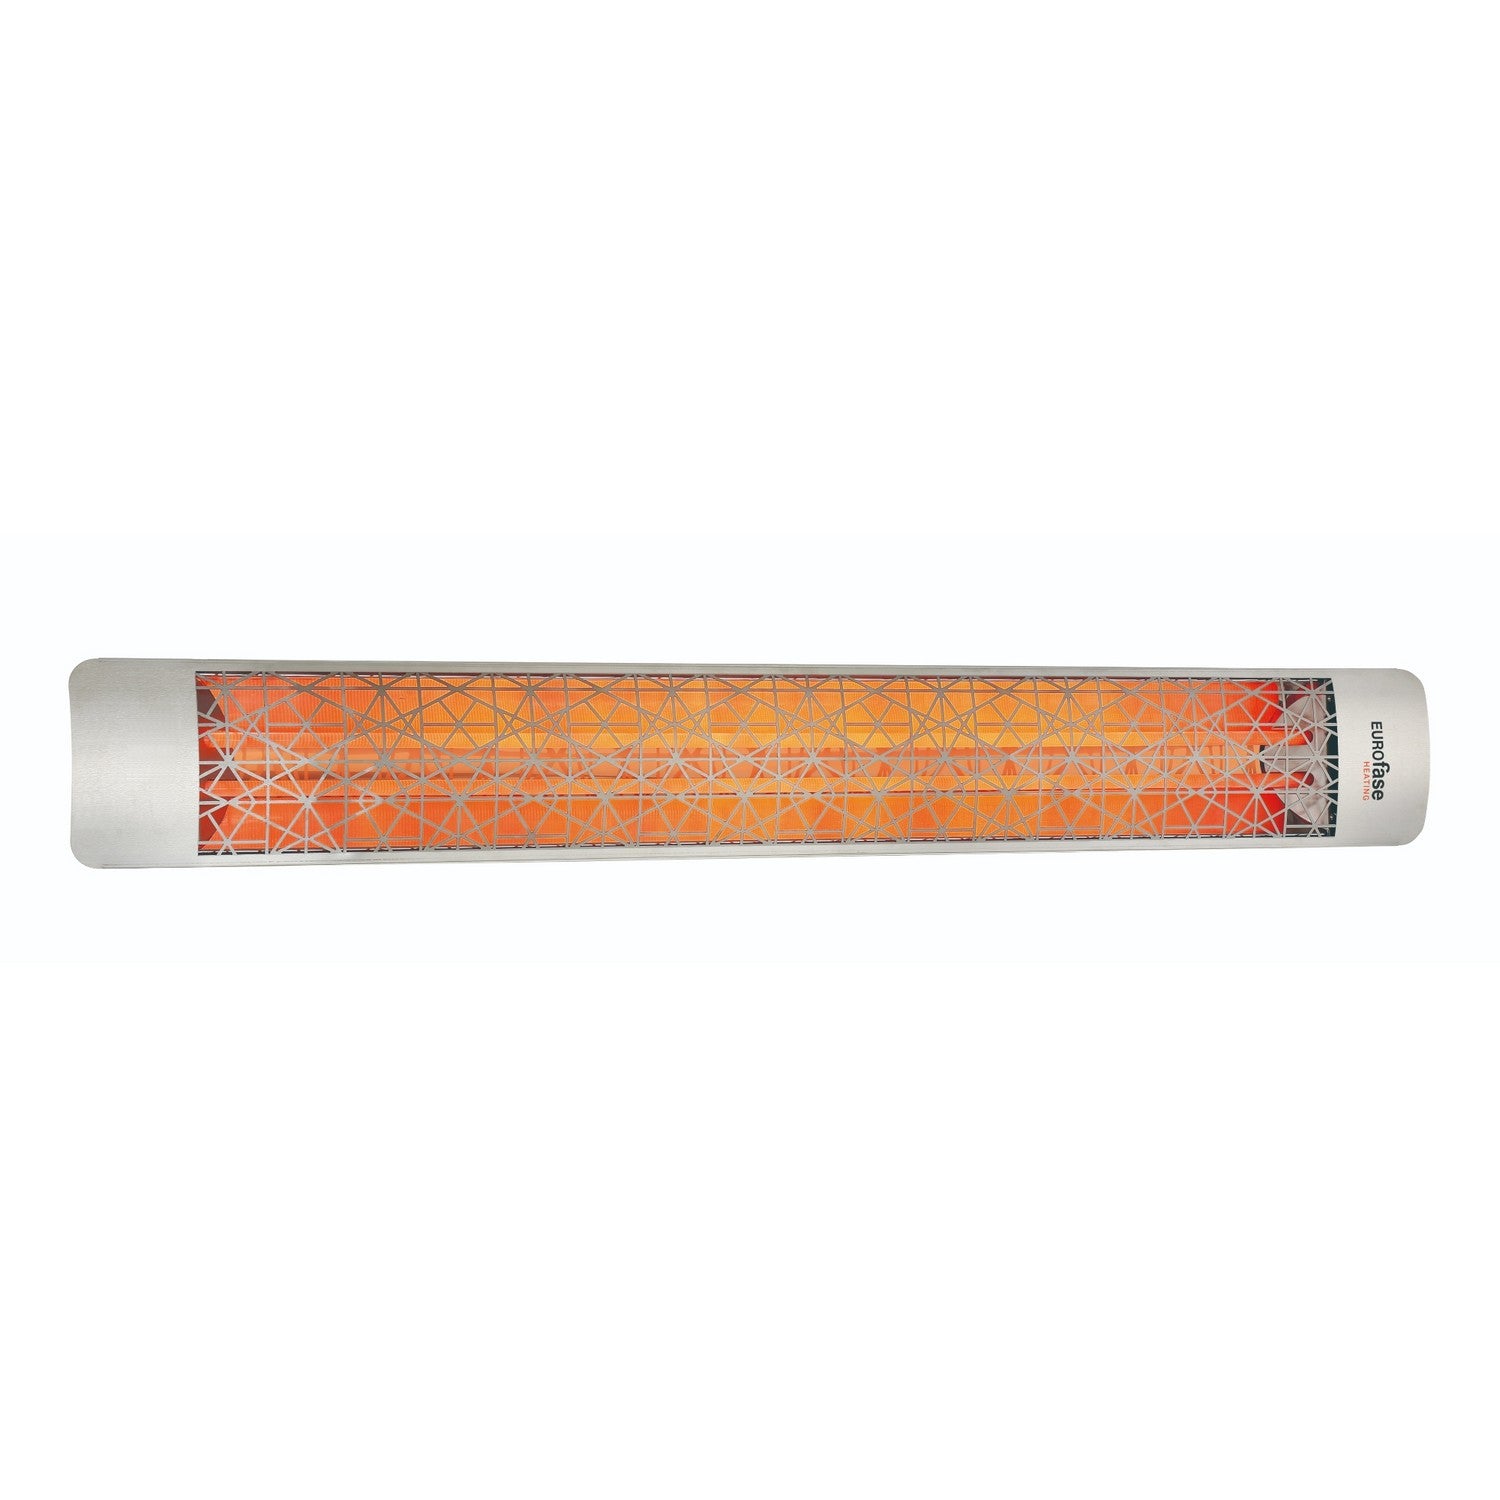 Eurofase - EF60480S4 - Electric Heater - Stainless Steel